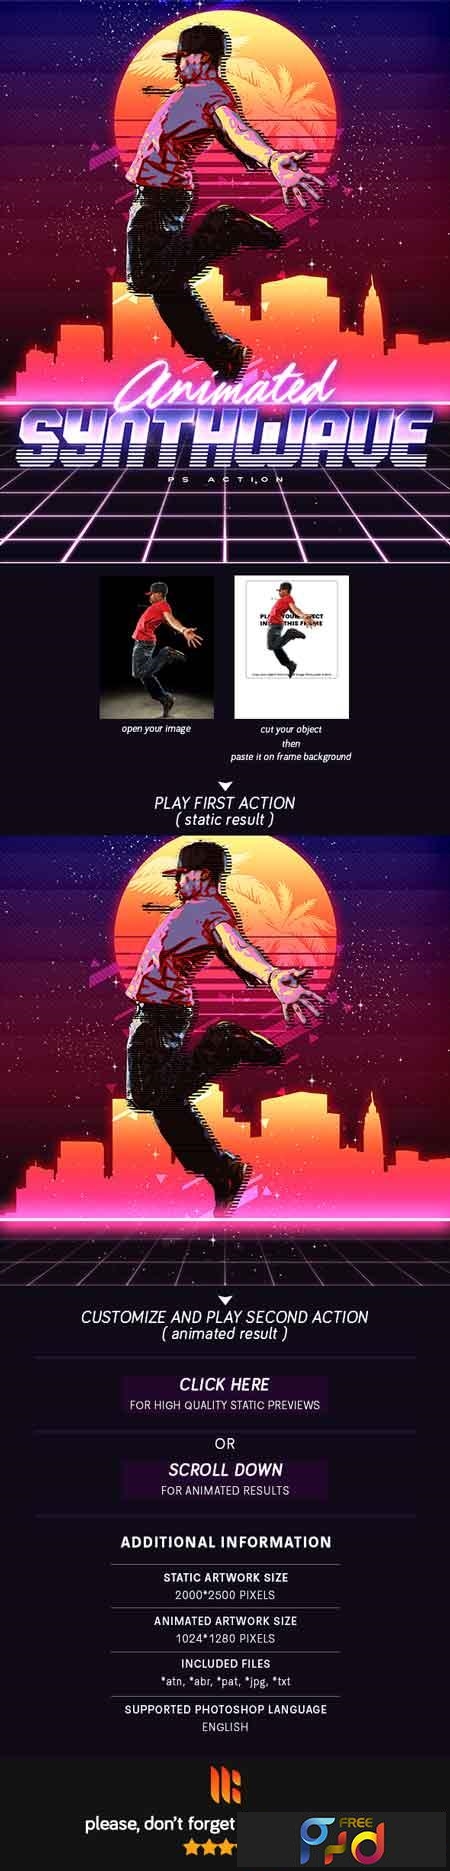 Animated 80u2019s Synthwave Poster   Photoshop Action